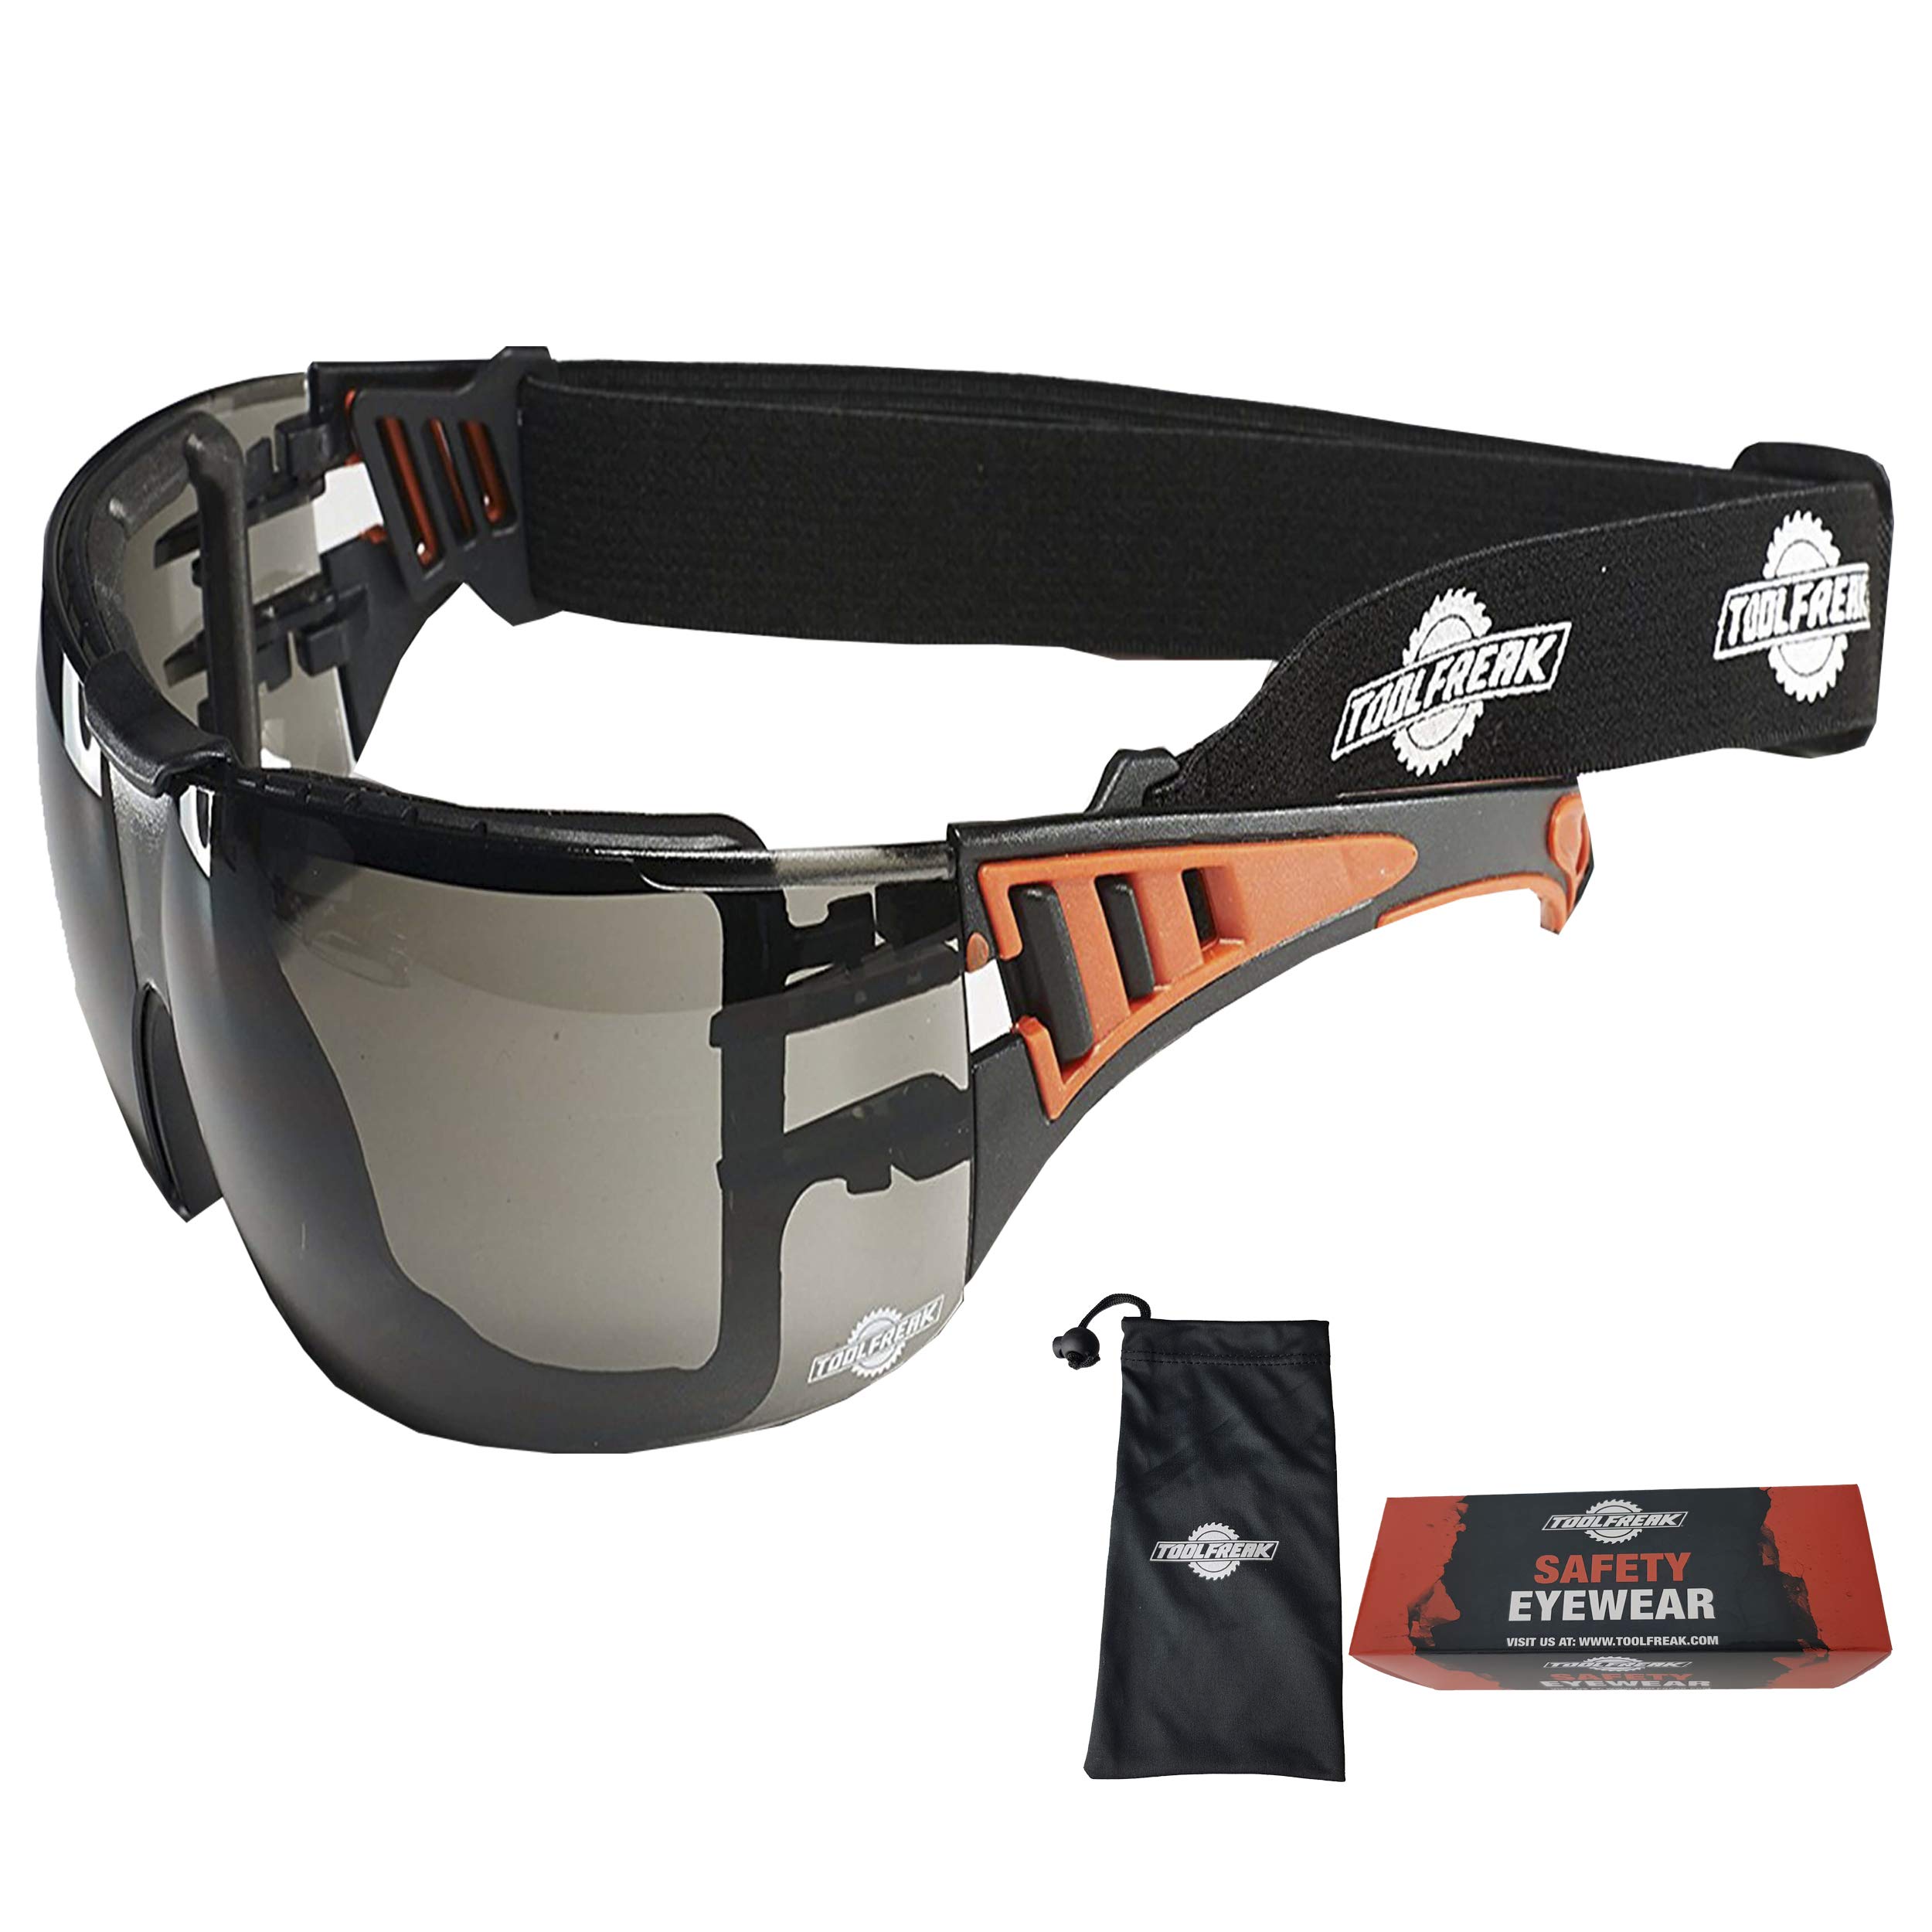 ToolFreak Rip Out Safety Glasses, Wraparound Smoke Tinted Polycarbonate Lens, Foam Padded, Impact and UV Rating, Headstrap and C